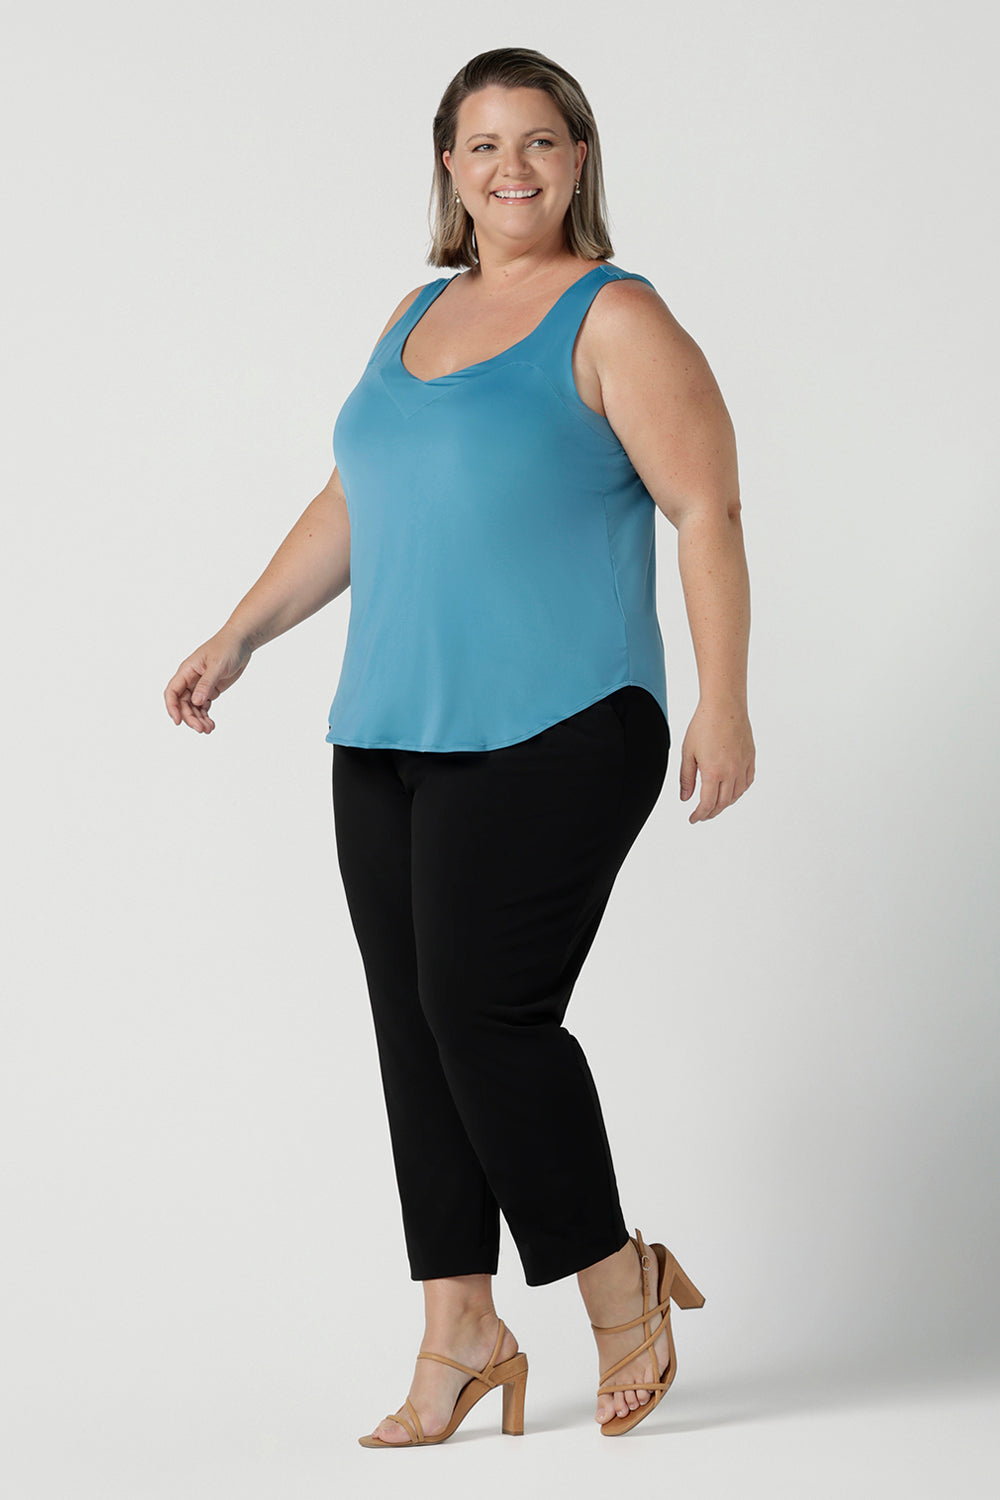 A size 18 woman wearing the Eddy Cami top in Mineral is a curve friendly cami top with wide shoulder straps for bra strap coverage. Made in Australia for women size 8 - 24.